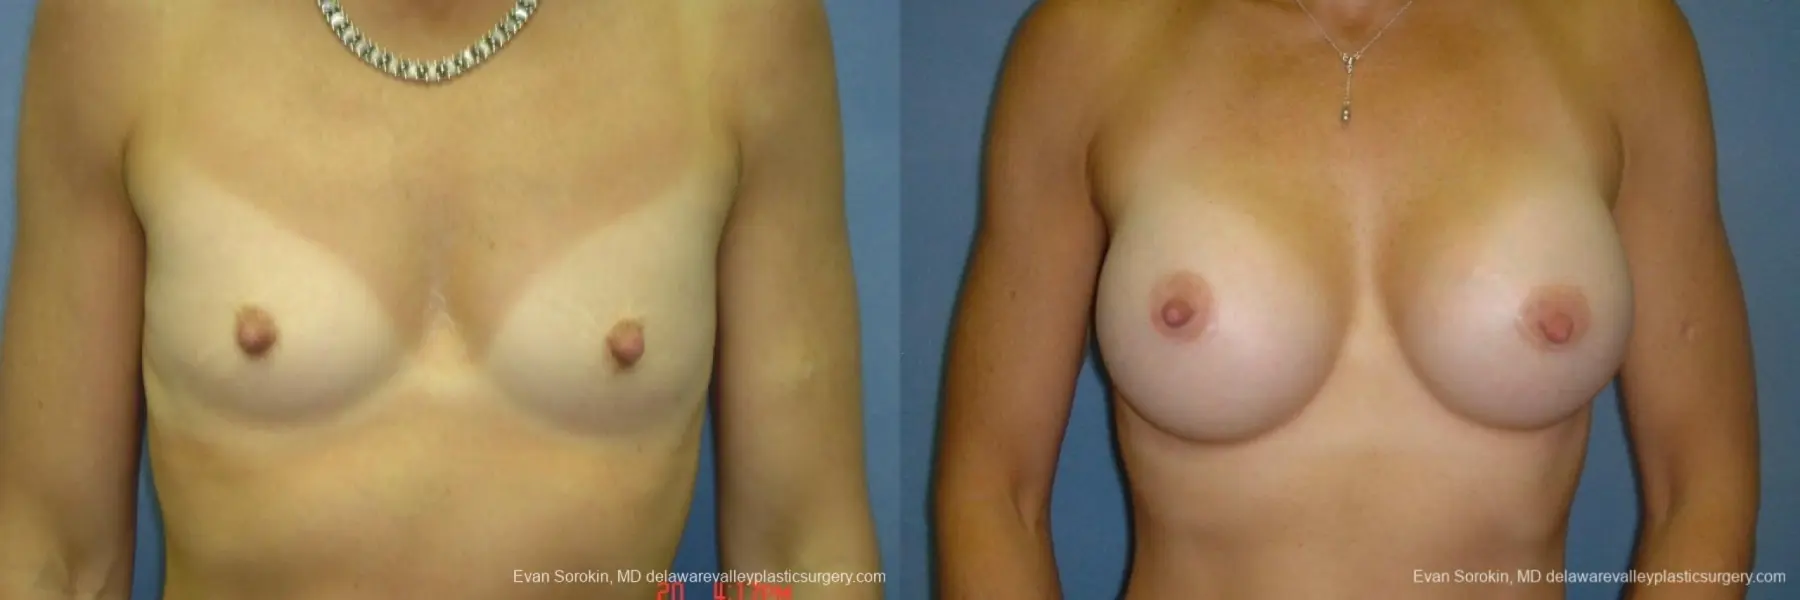 Breast Augmentation 8667 - Before and After 1